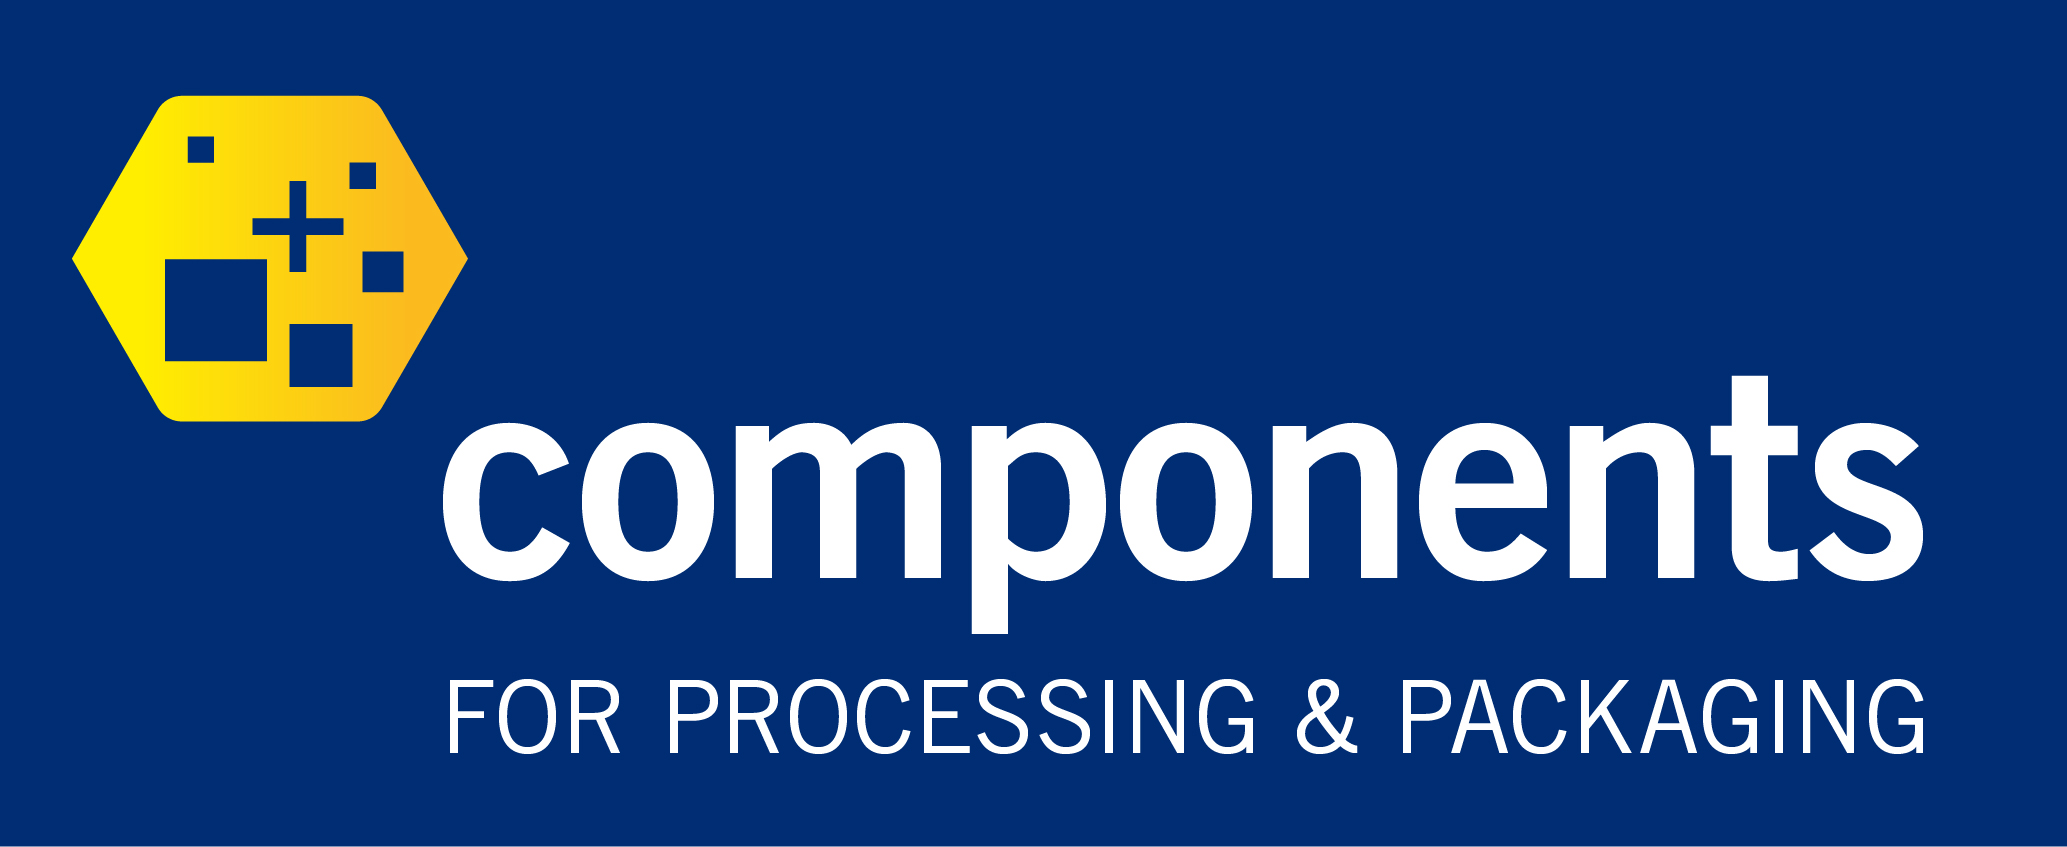 interpack / components for processing and packaging 2023